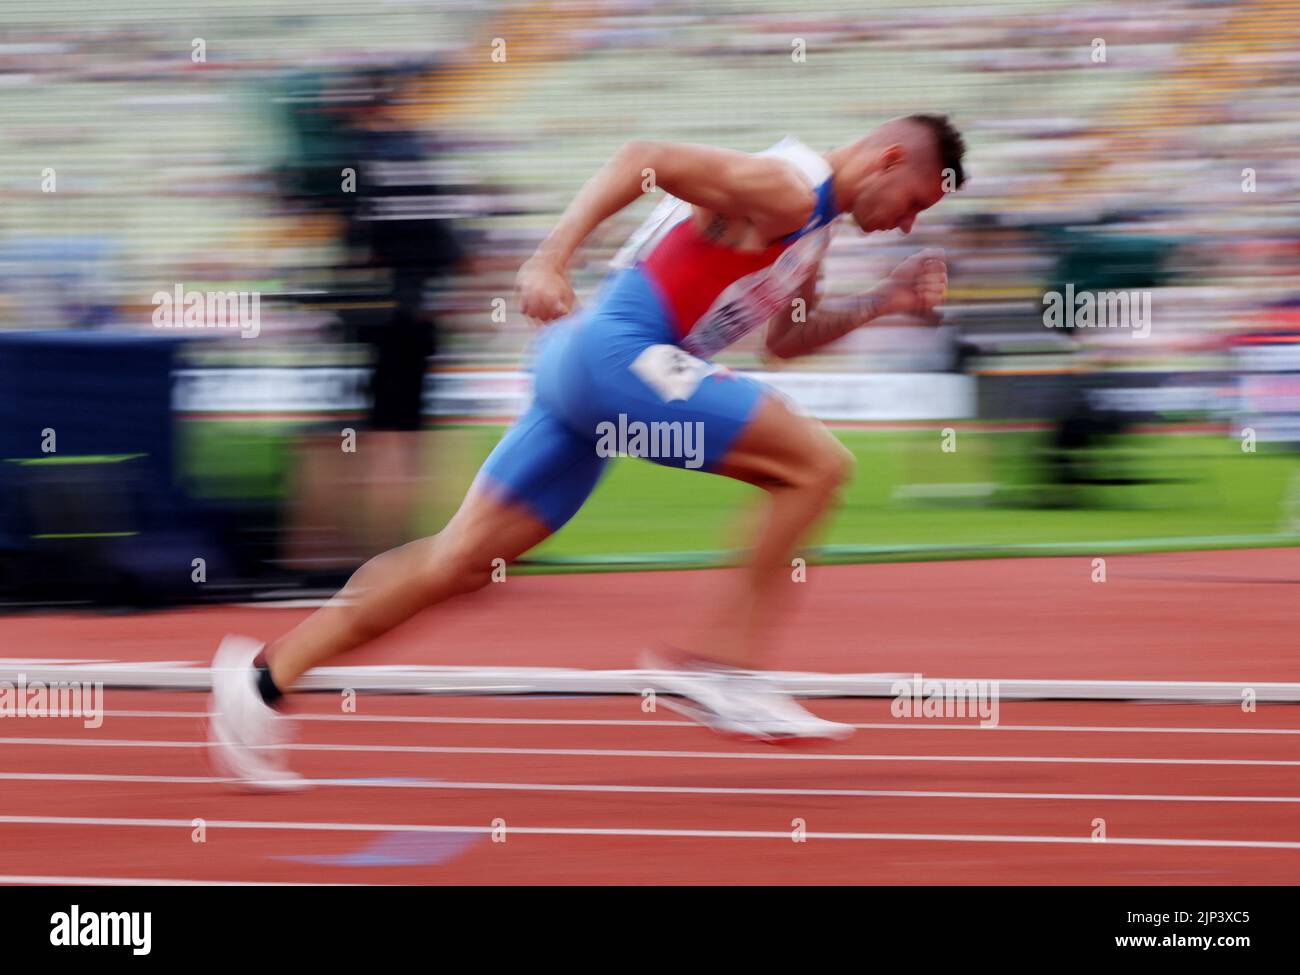 Athletics - 2022 European Championships - Olympiastadion, Munich, Germany - August 15, 2022 Czech Republic's Pavel Maslak in action during the Men's 400m Round 1 Heat 4 REUTERS/Wolfgang Rattay Stock Photo